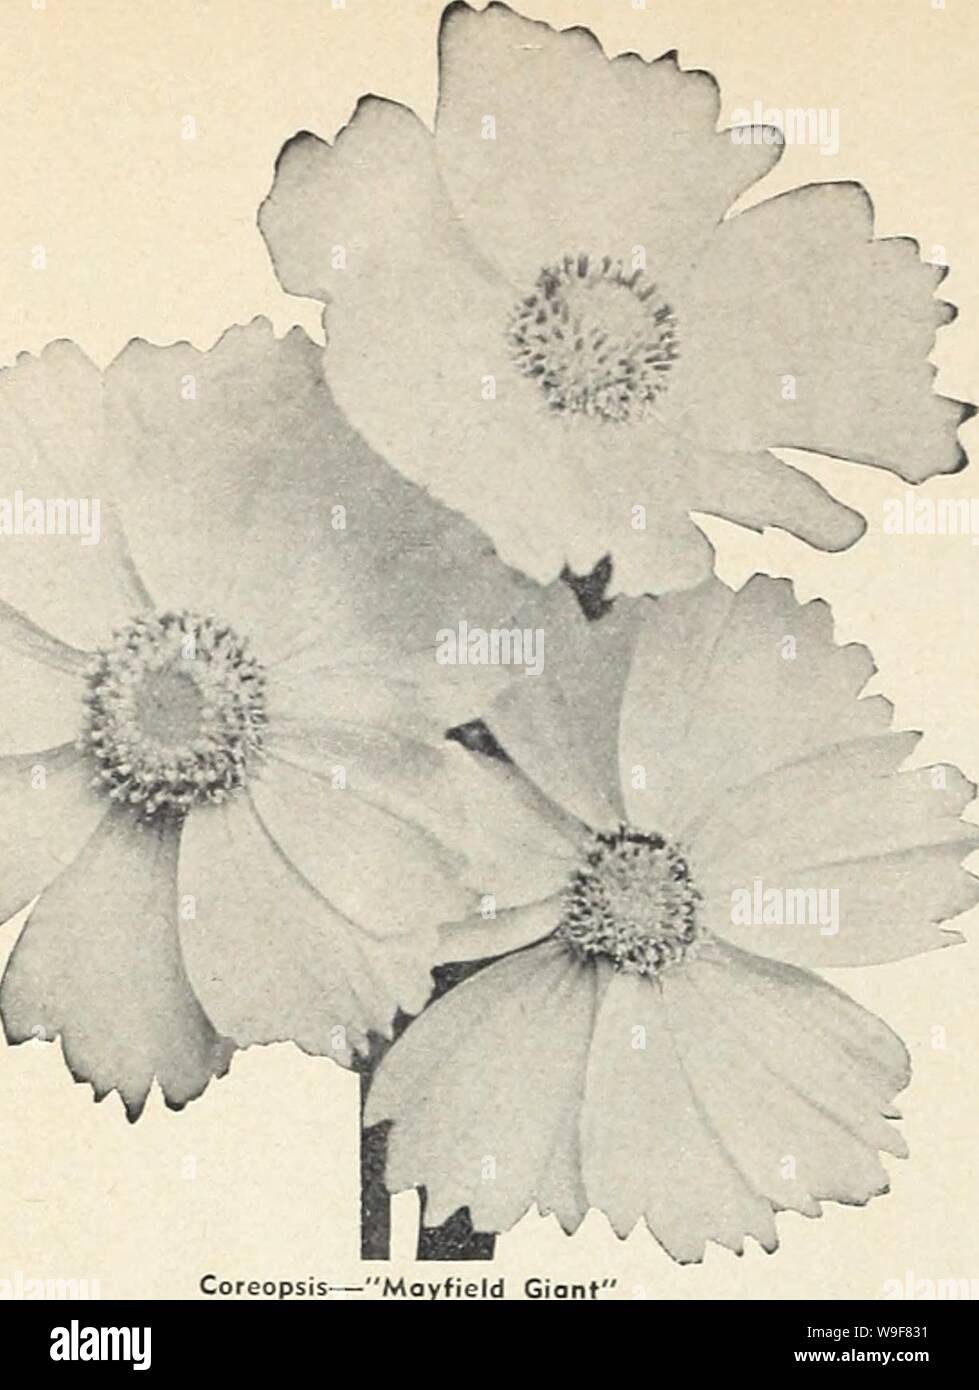 Archive image from page 21 of Currie's garden annual (1942). Currie's garden annual  curriesgardenann19curr 7 Year: 1942 ( c    Coreopsis—'Moyfield Gi ANEMONE WINDFLOWER—Lorge showy flowers. Pkt.. lOe. CORONARIA (Poppy Anemone) —Choice mixed colors. Pkt., 10c. ST. BRIGID—Double ond semi-double flowers in mony colors. Pkt., 15e. ALICE—Rosy-pink, lavender center. QUEEN CHARLOTTE—Semi-double pink. Plonts. 35e. VITIFOLIA (Huphiensis) — Single pink flowers August to lote fall. 12'. Plants, 3Se; dox., 53.50. WHIRLWIND—Large, semi-double, pure white. Plants, 35e; doz., S3.50. BAPTISIA (Folse Indigo) Stock Photo